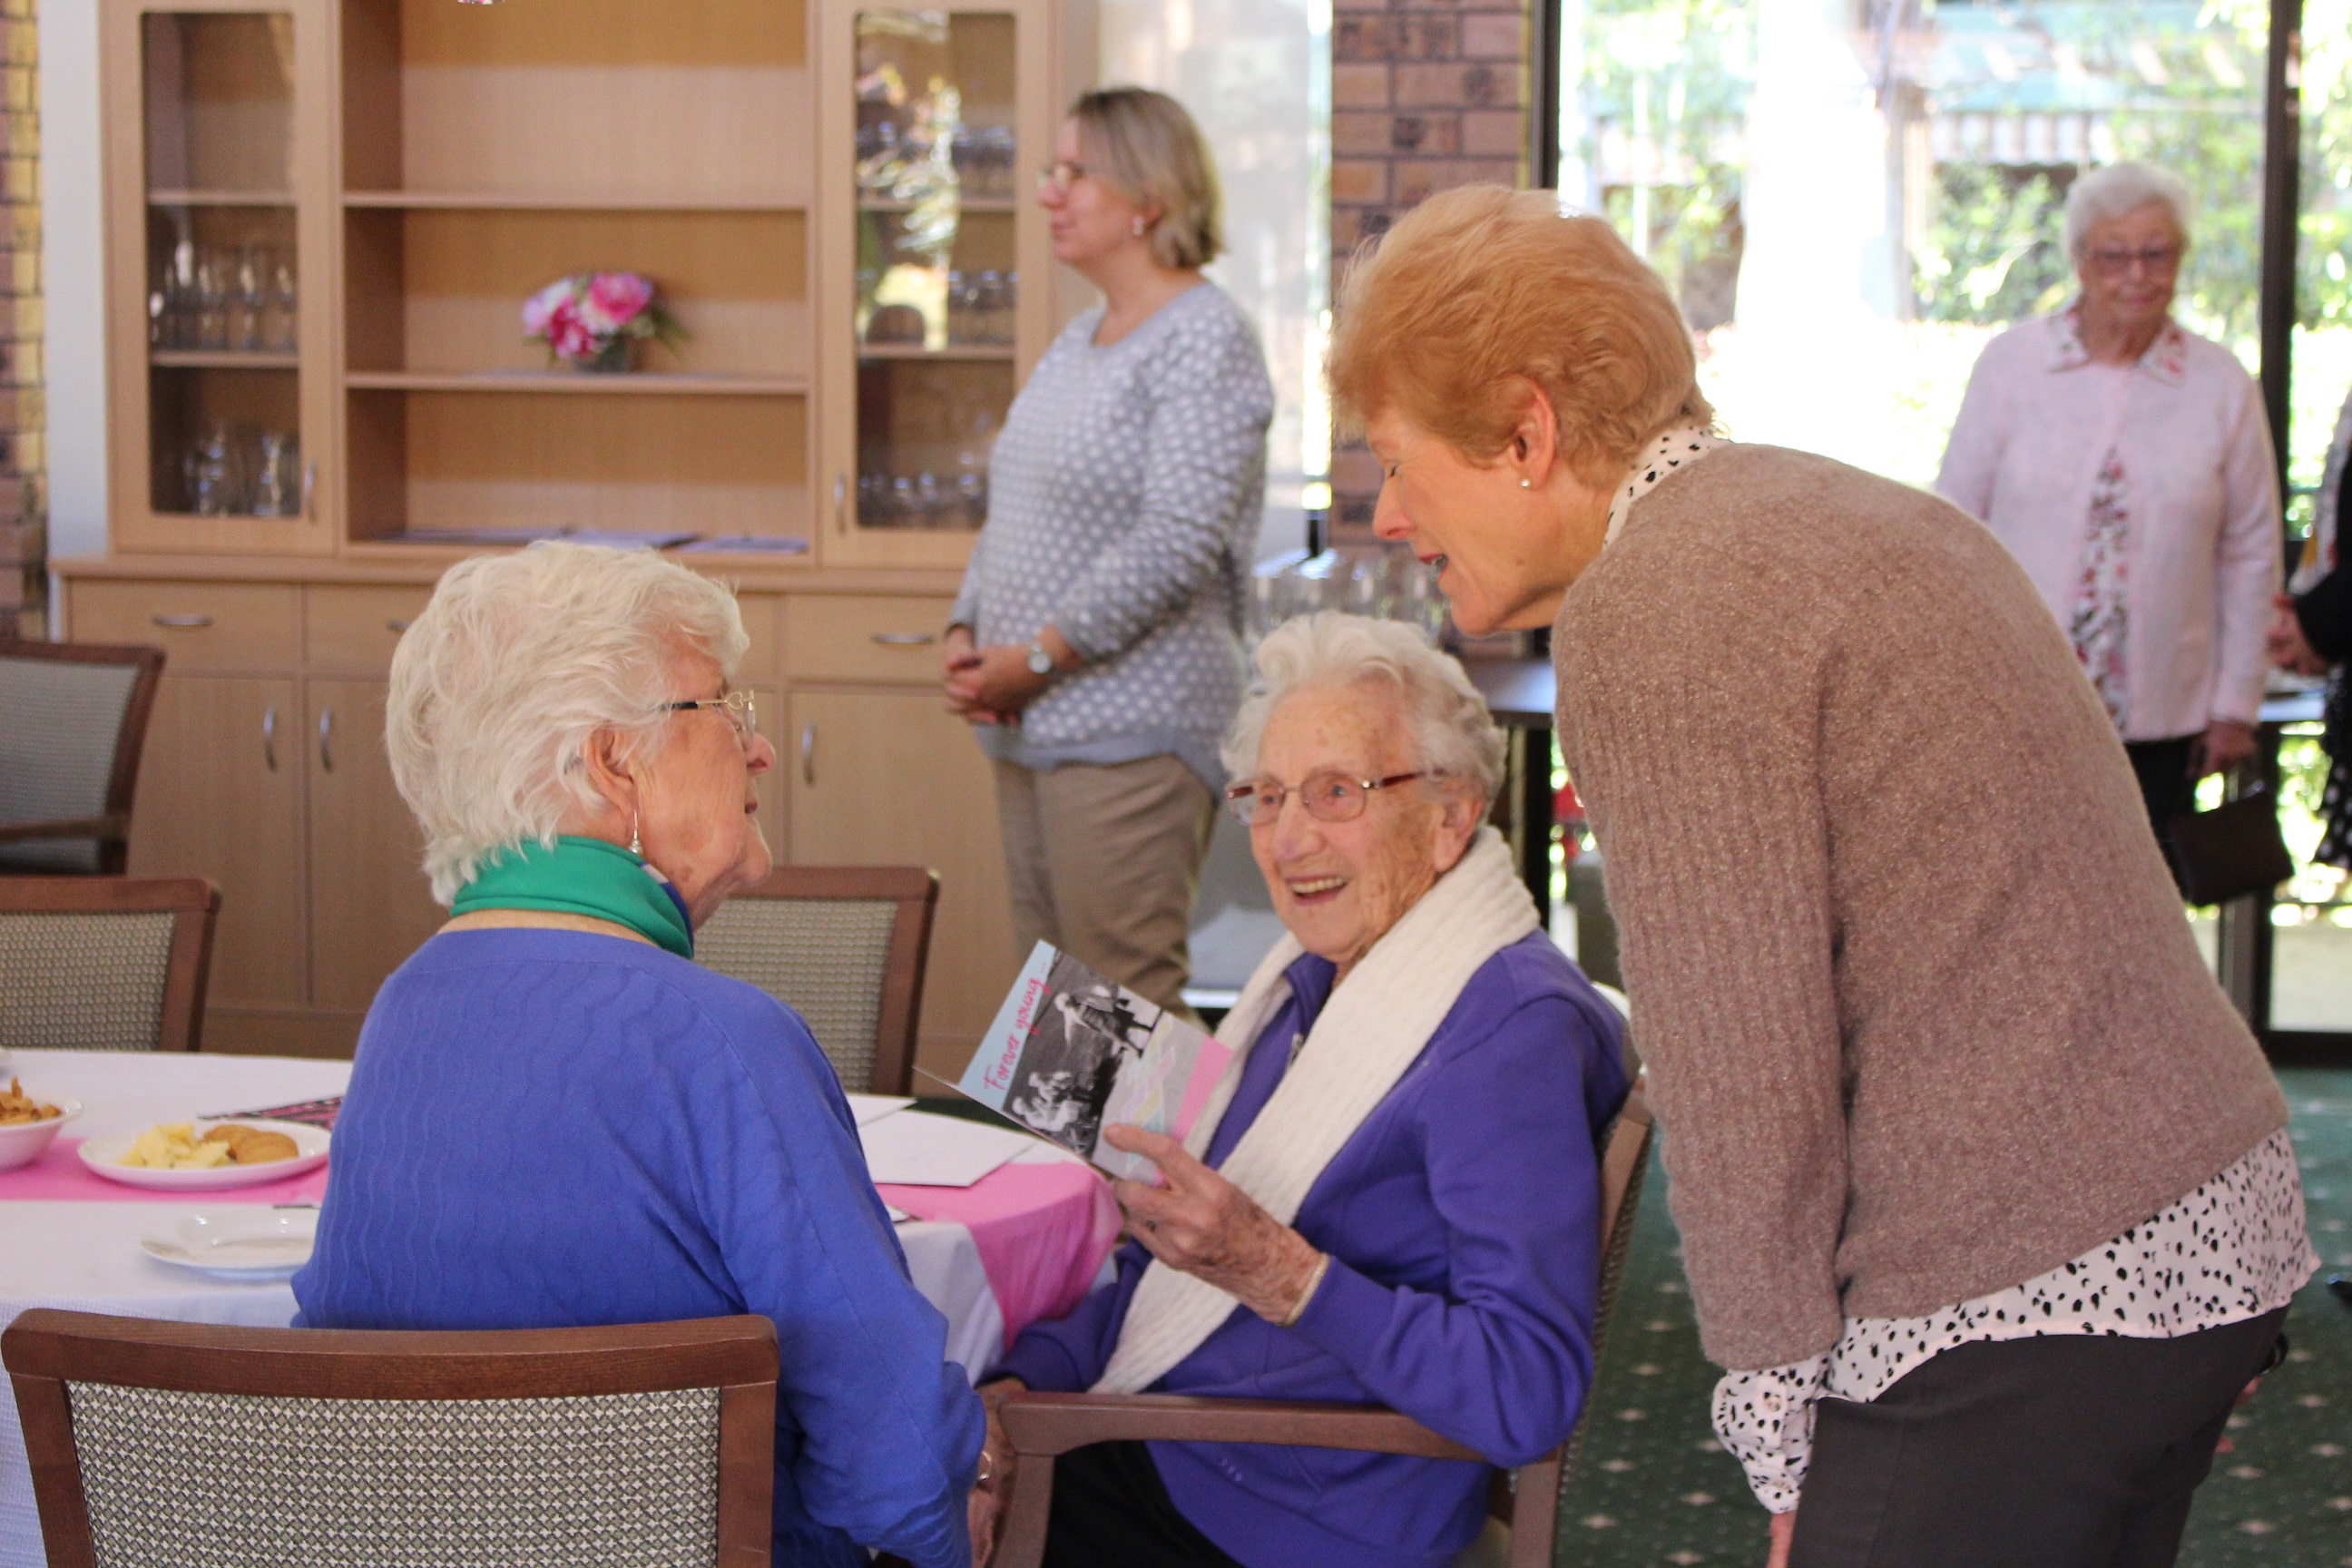 Doris-at-her-party | RSL LifeCare - provide care and service to war veterans, retirement villages and accommodation, aged care services and assisted living